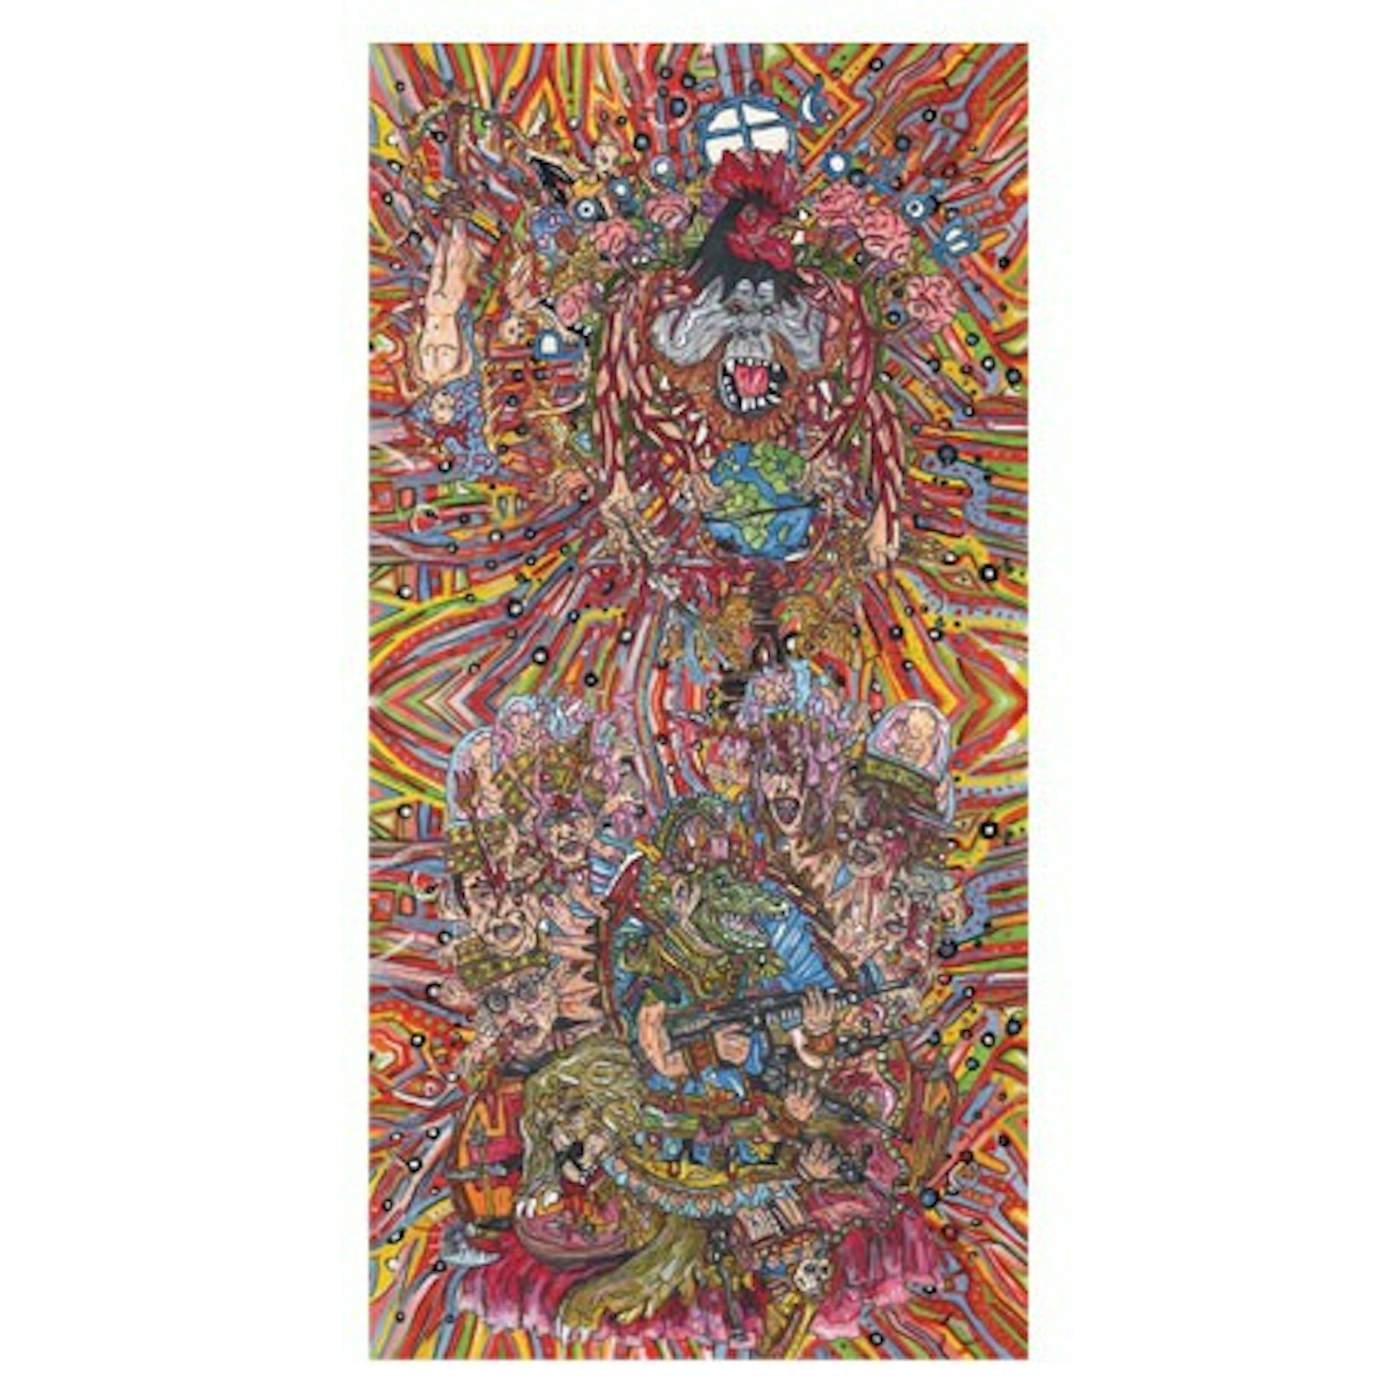 of Montreal Paralytic Stalks 2-Sided Poster (12"x24")